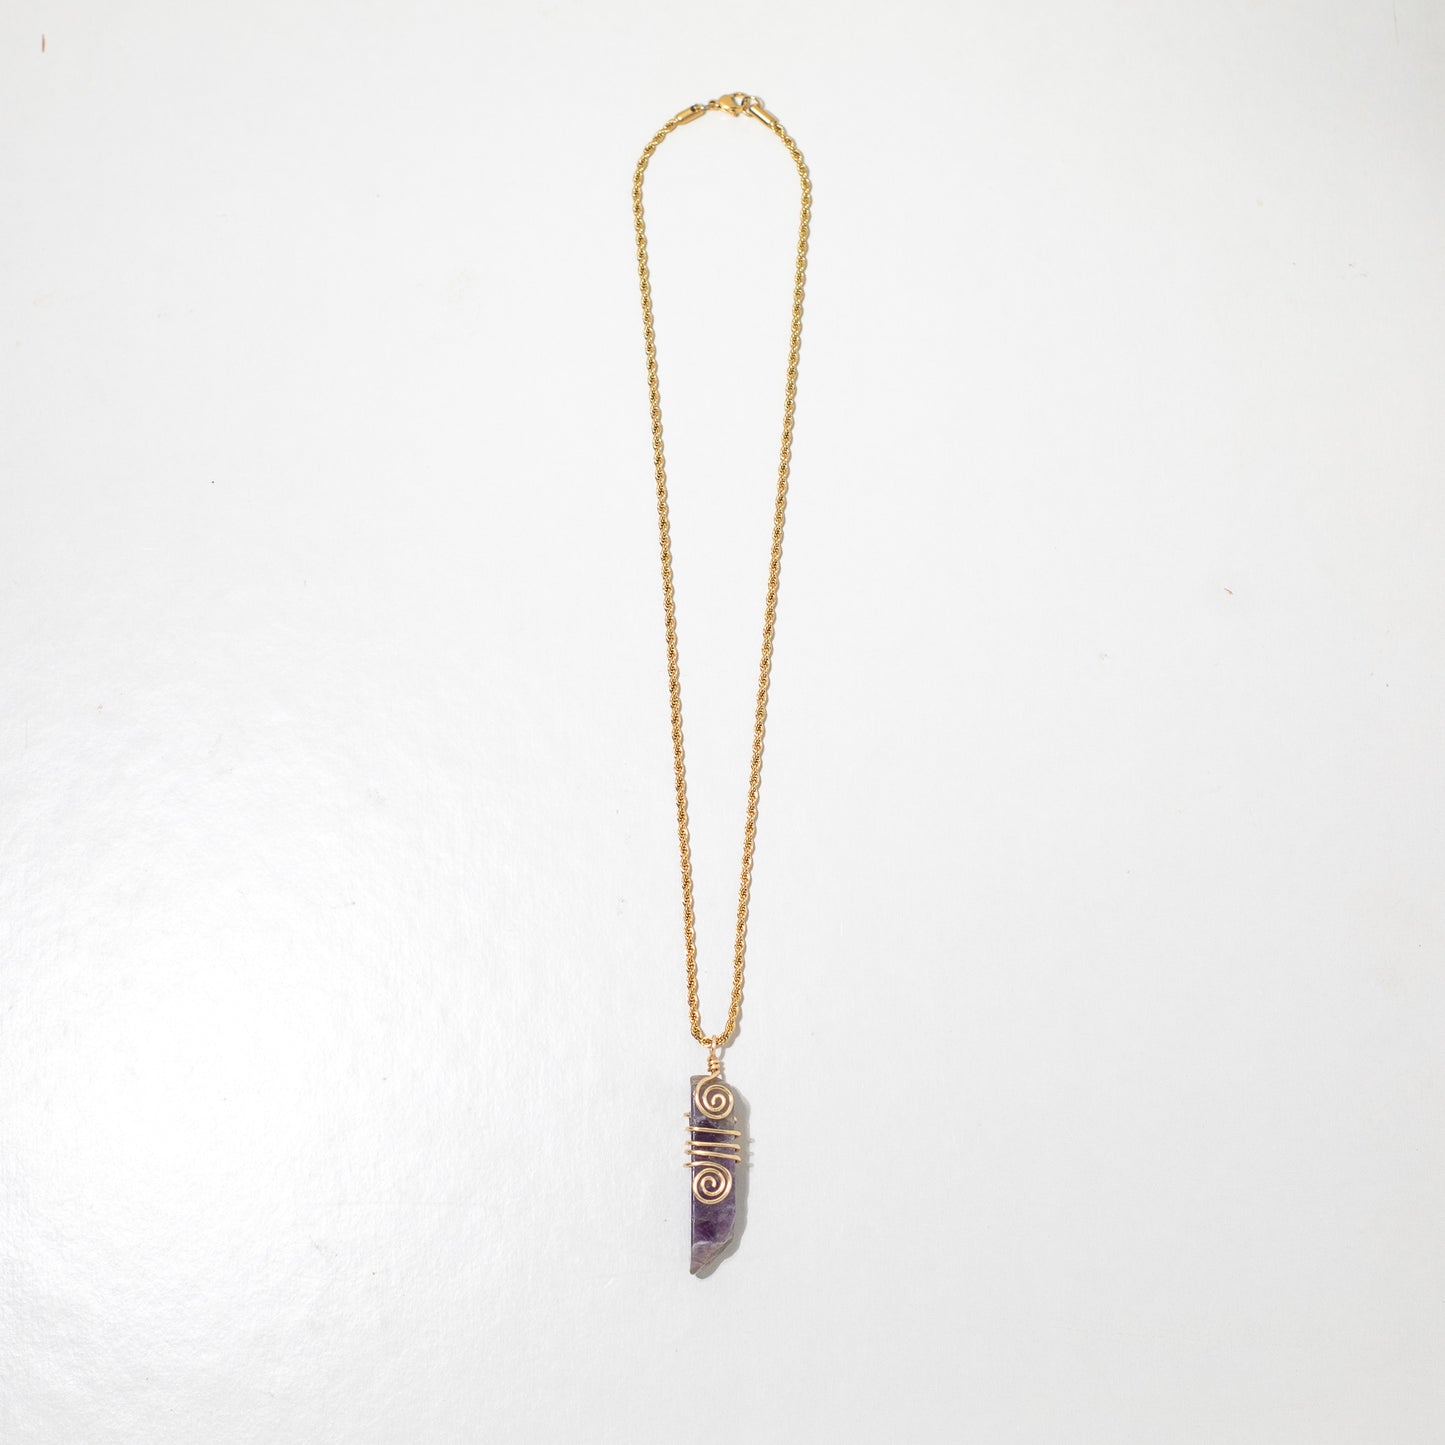 Spiral Wire Wrapped Amethyst Pendant Necklace